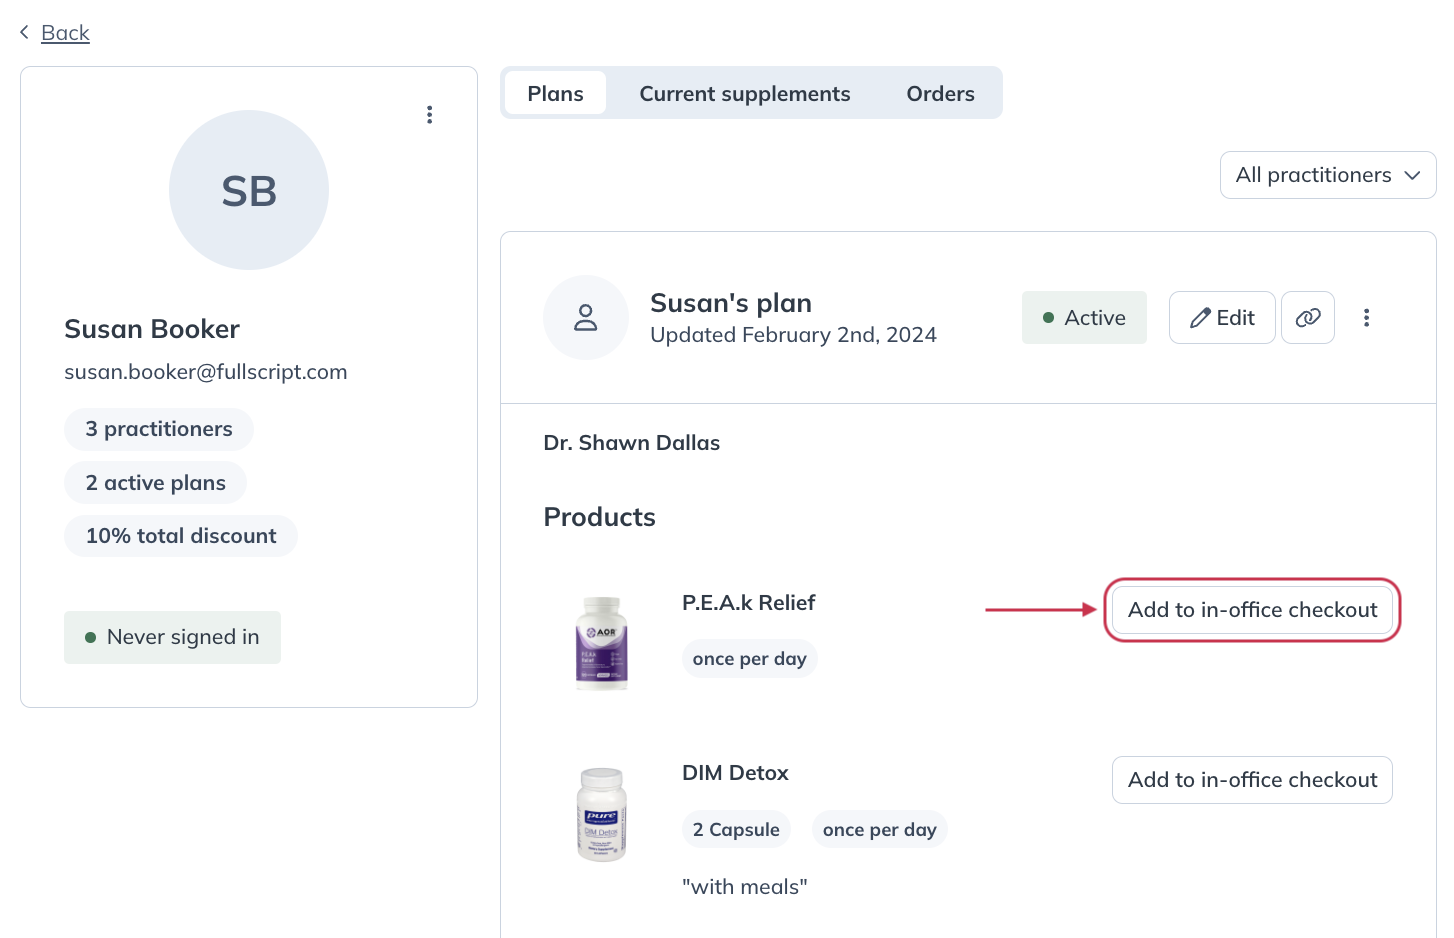 Adding products from a supplement plan to begin assembling an in-office cart